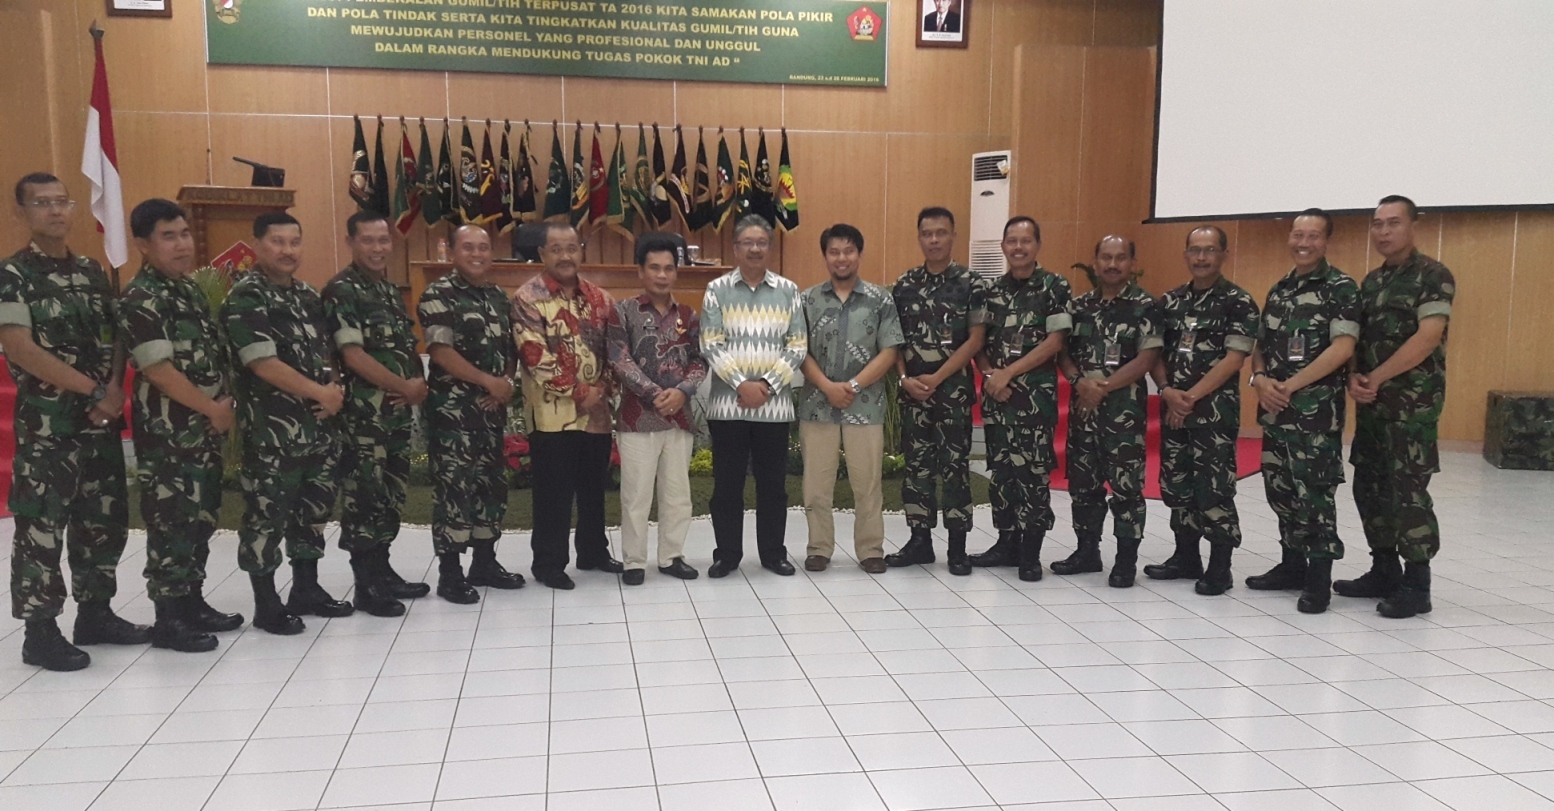 The Participation of SGU Team on the Centralized Debriefing of Indonesia’s Military Teachers/Coaches